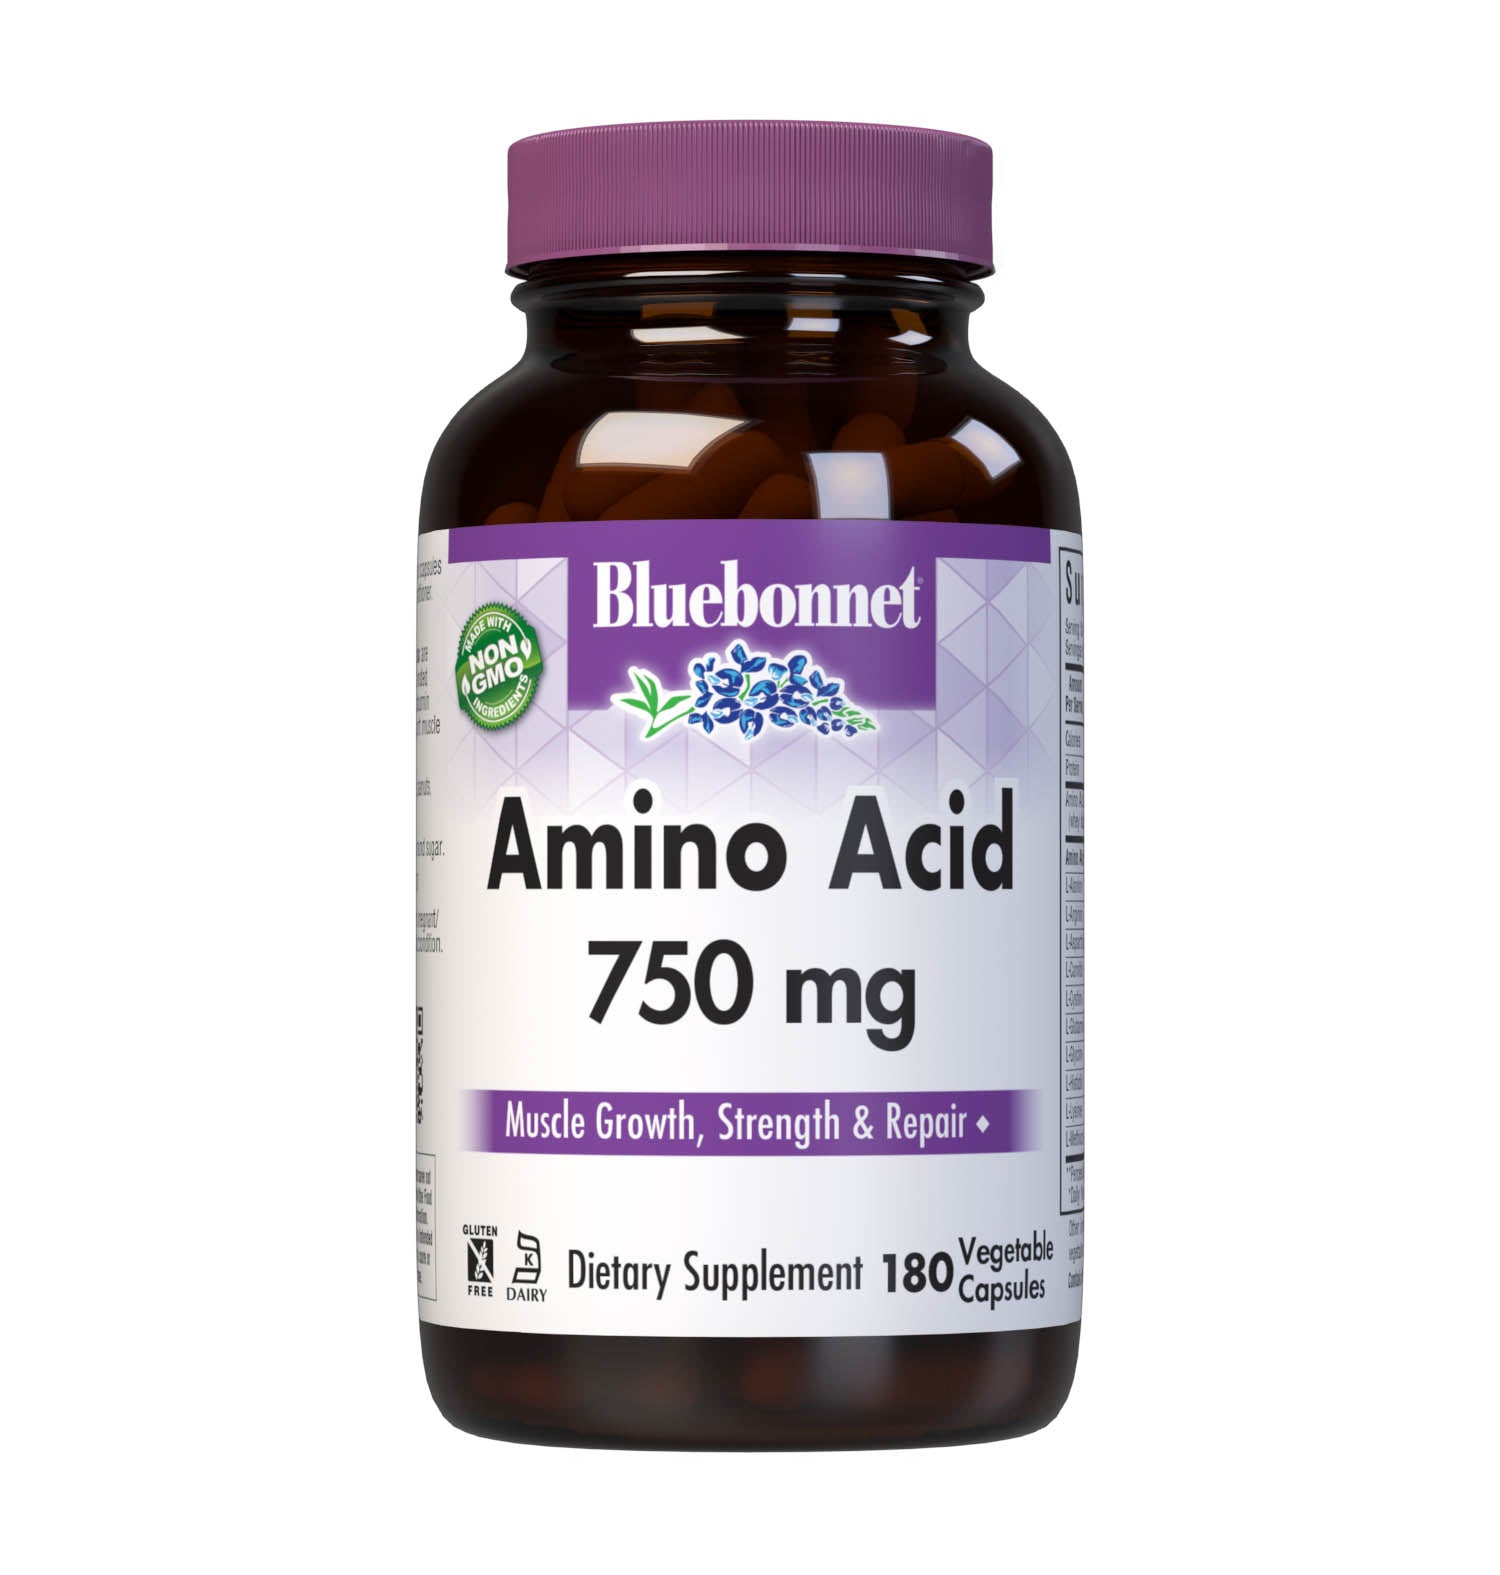 Bluebonnet’s Amino Acid 180 Vegetable Capsules are formulated with amino acids and dipeptide bonded amino acids derived entirely from whey lactalbumin and egg white albumin proteins for muscle growth, strength and repair. #size_180 count